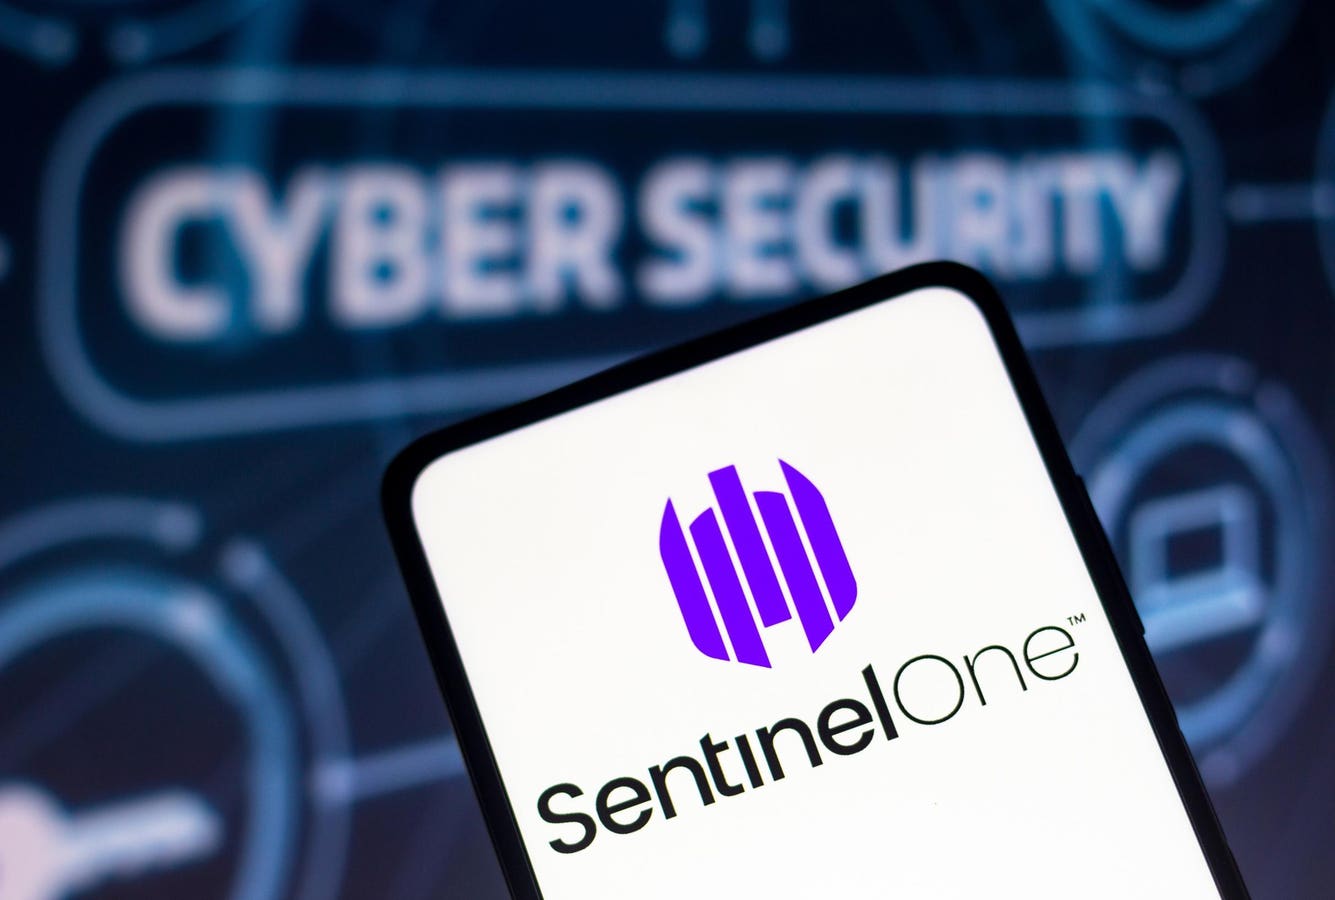 SentinelOne Acquires PingSafe For Over $100 Million